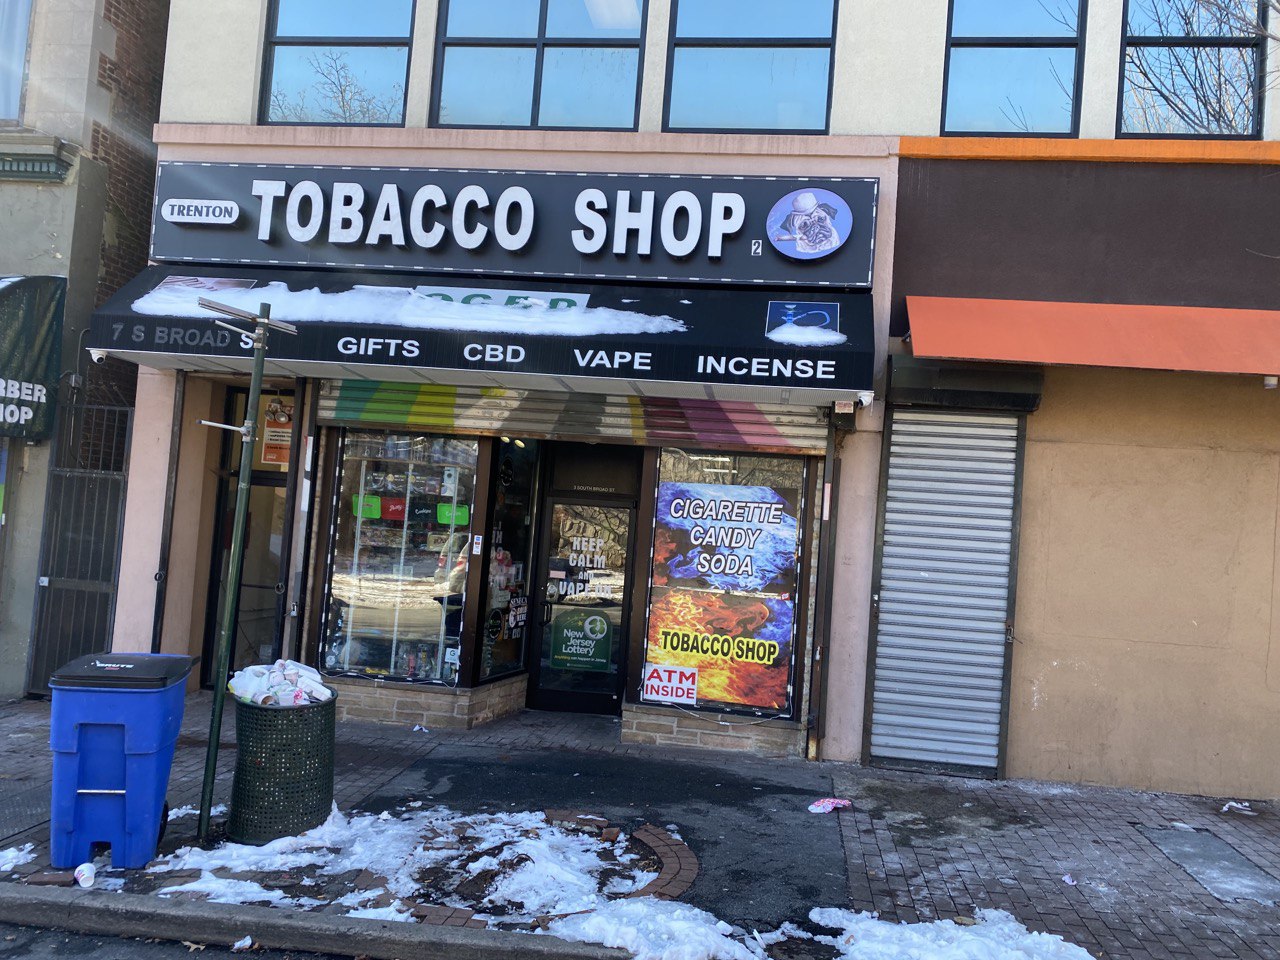 Getcoins - Bitcoin ATM - Inside of Tobacco Shop  in Trenton, New Jersey